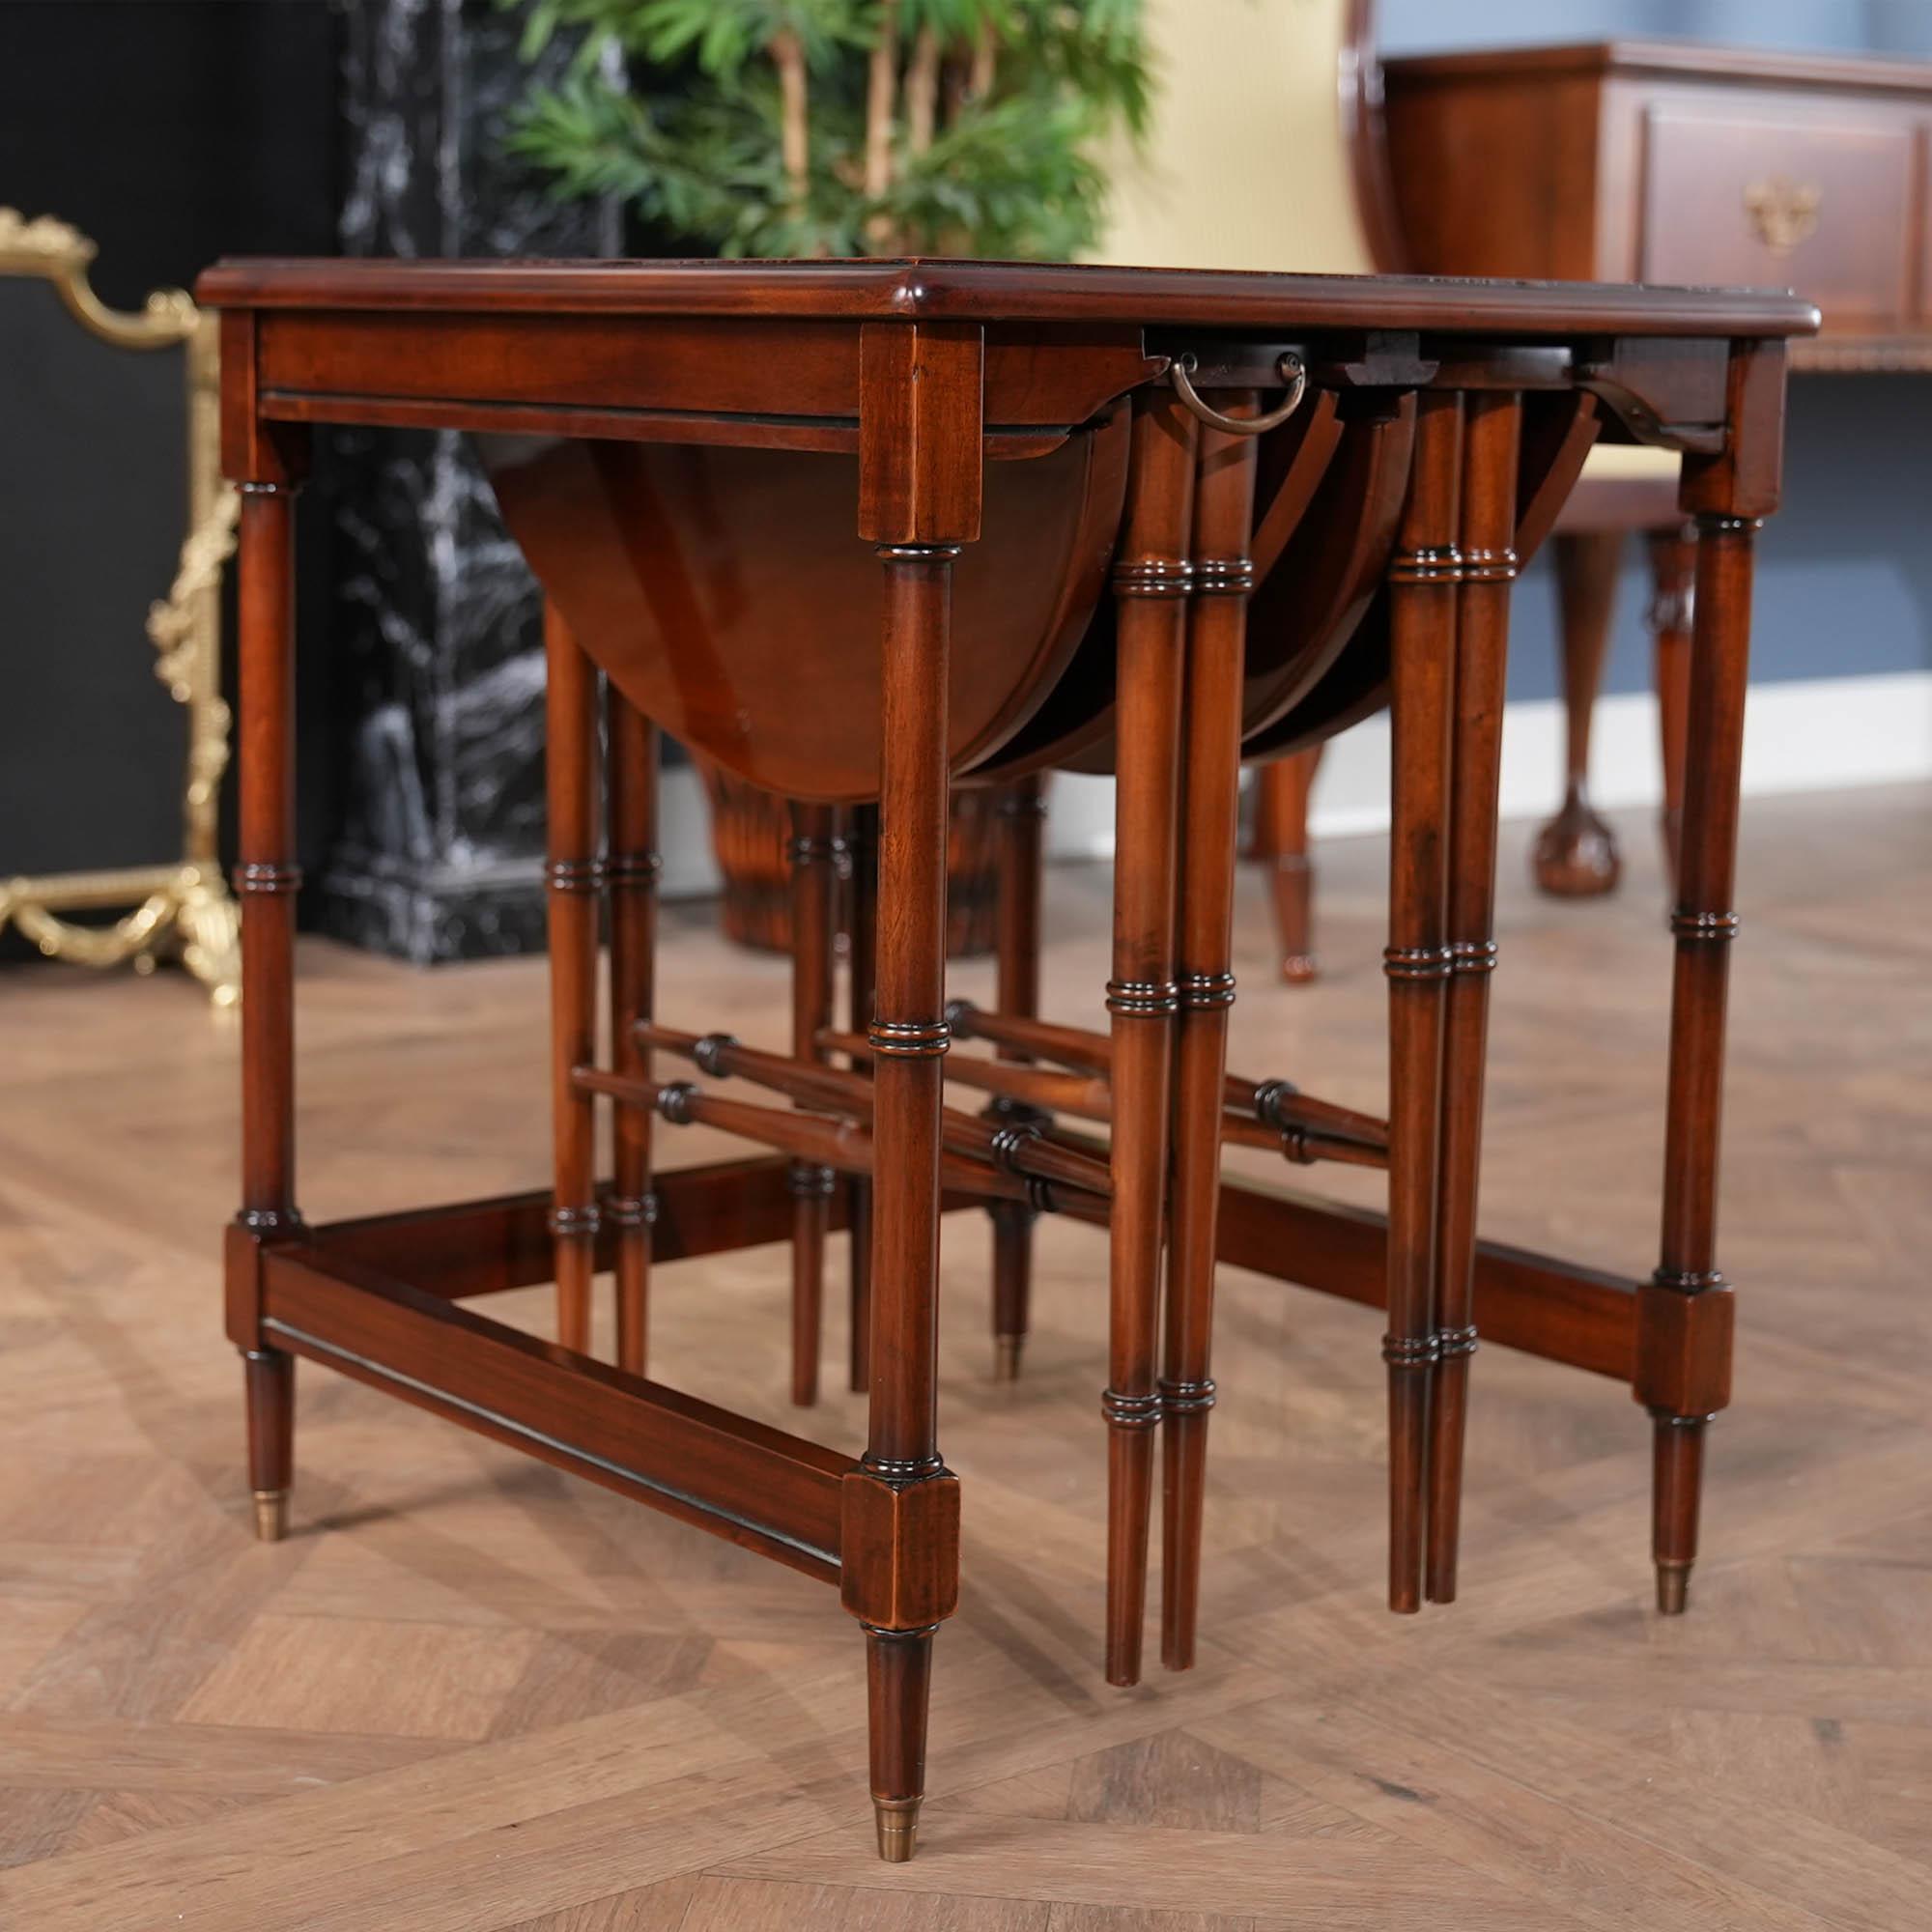 This English style Leather Top Nesting Table from Niagara Furniture features three tables, the larger table with a genuine leather, tooled panel and the smaller two tables with attractive mahogany tops and fold out cross supports. Supported on hand